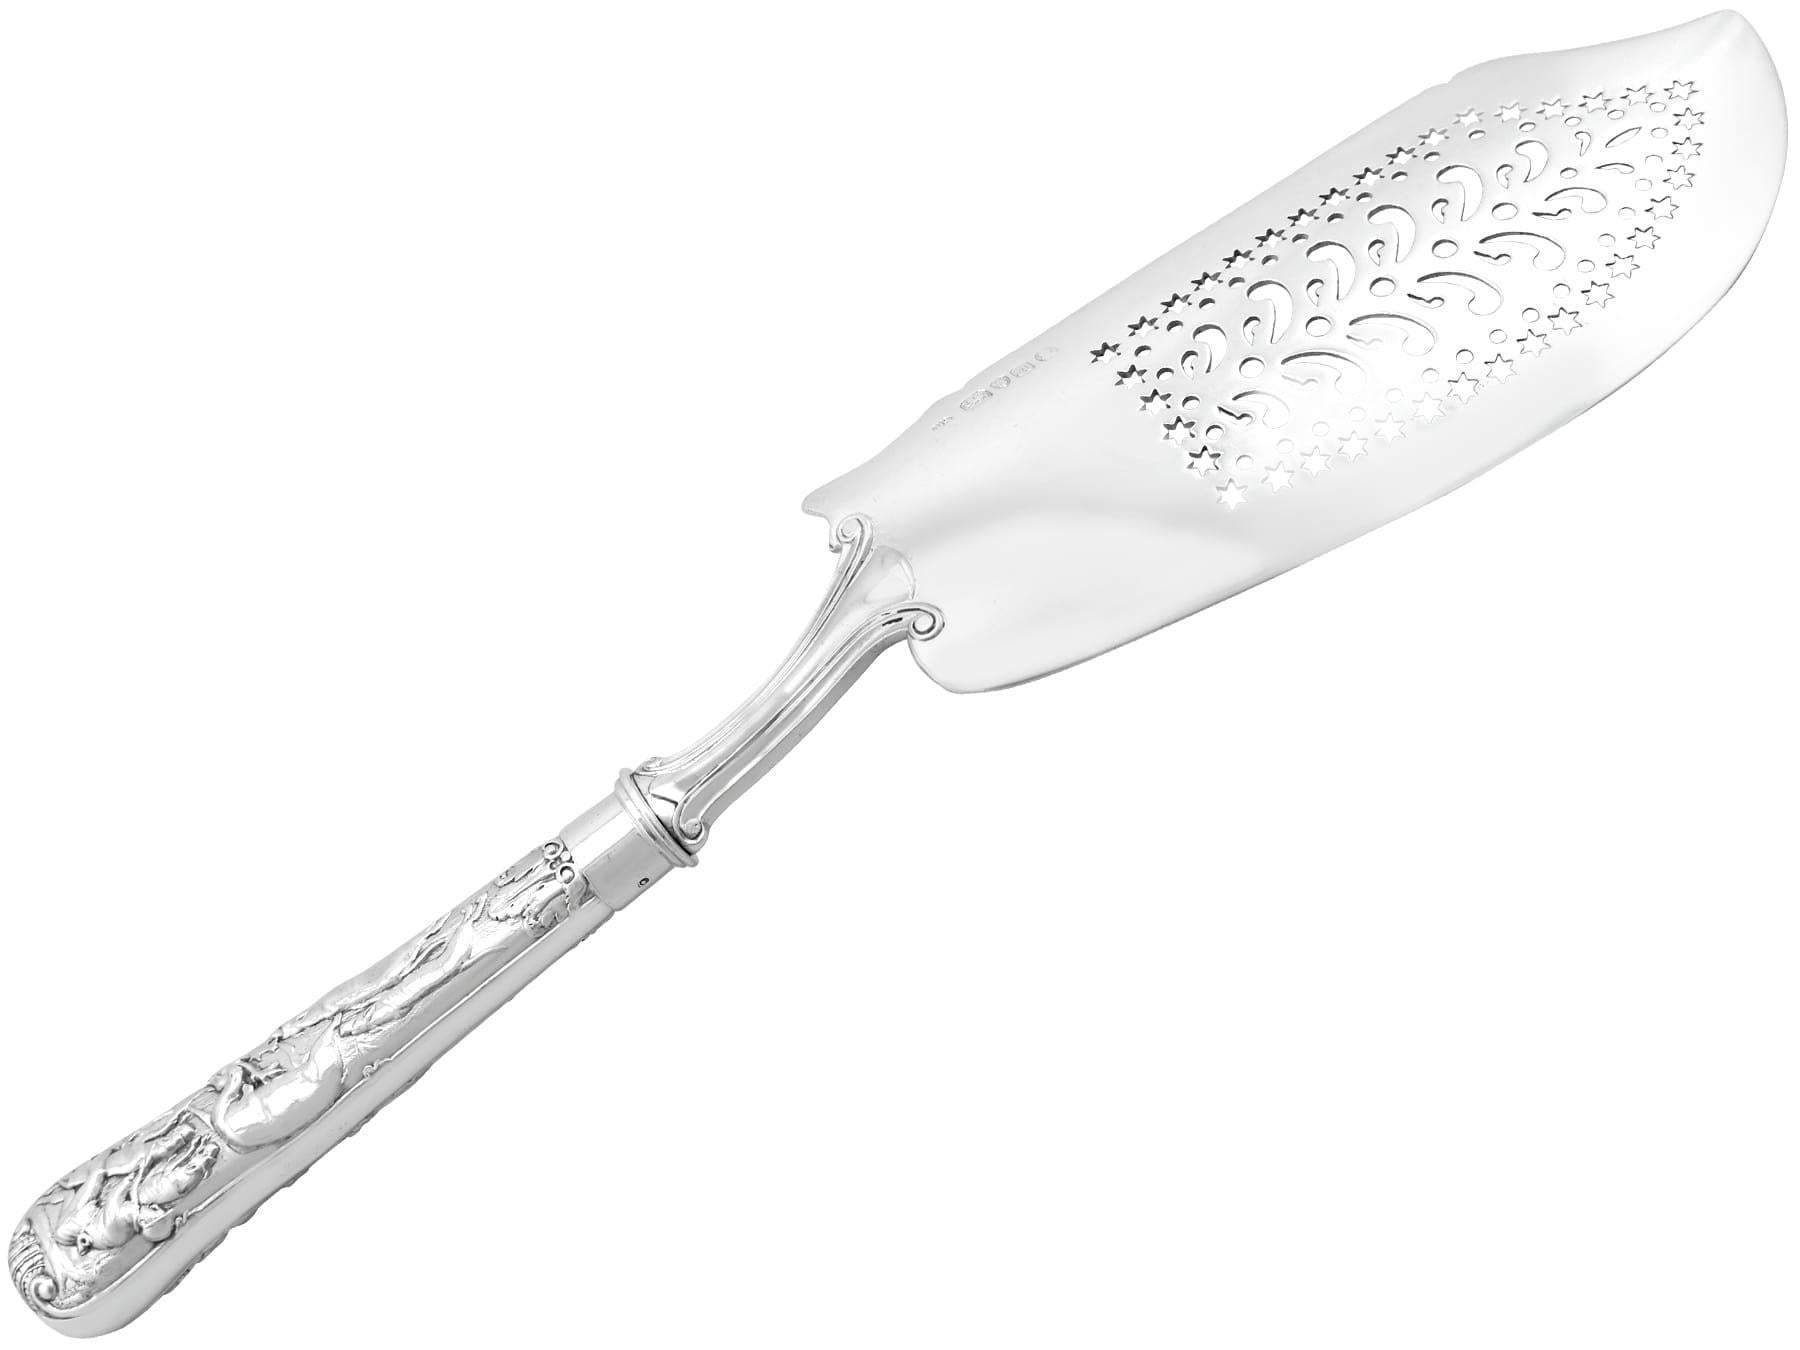 British Rare Antique Sterling Silver Stag Hunt Pattern Fish Slice / Server by Paul Storr